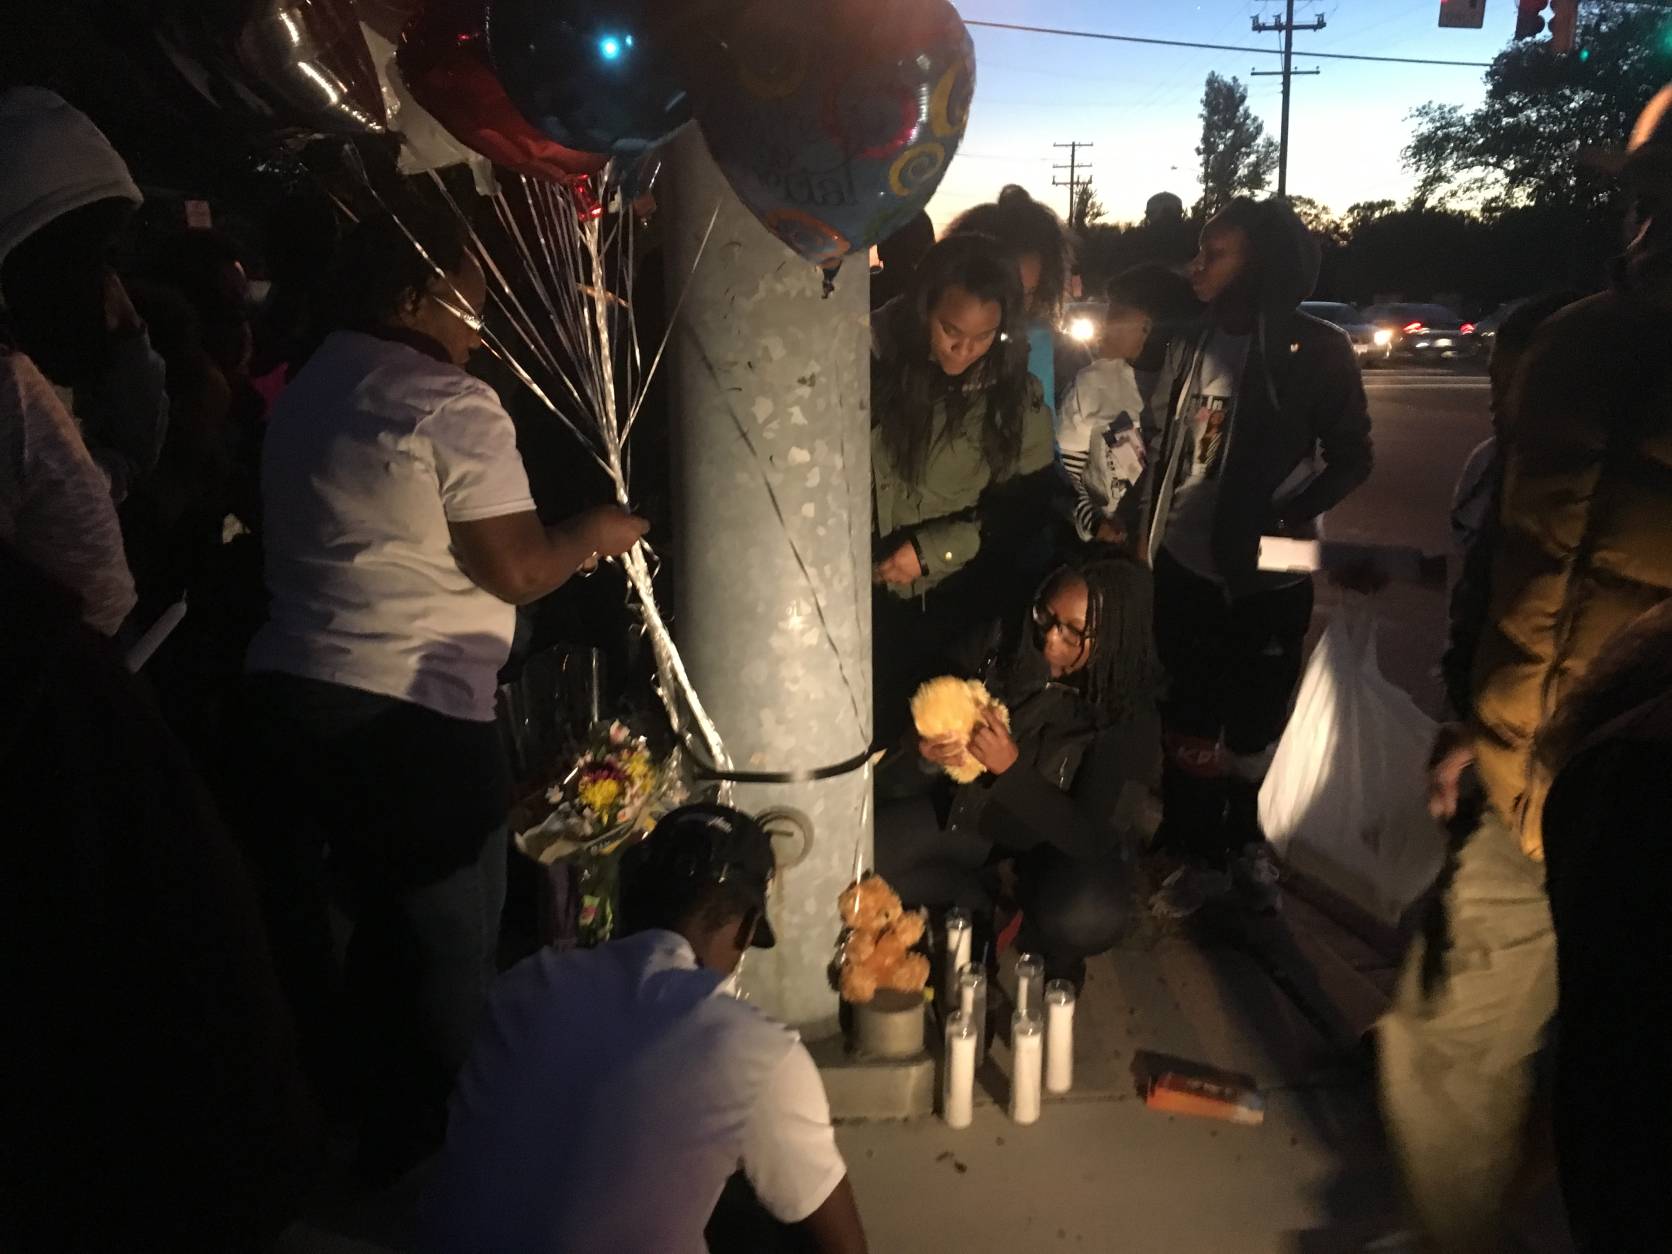 Family and friends gathered at the intersection of St. Barnabas Road and Wheeler Road Monday, Oct. 10 to remember 23-year-old Kishon Wiggins, who was struck and killed at the intersection. (WTOP/Mike Murillo)